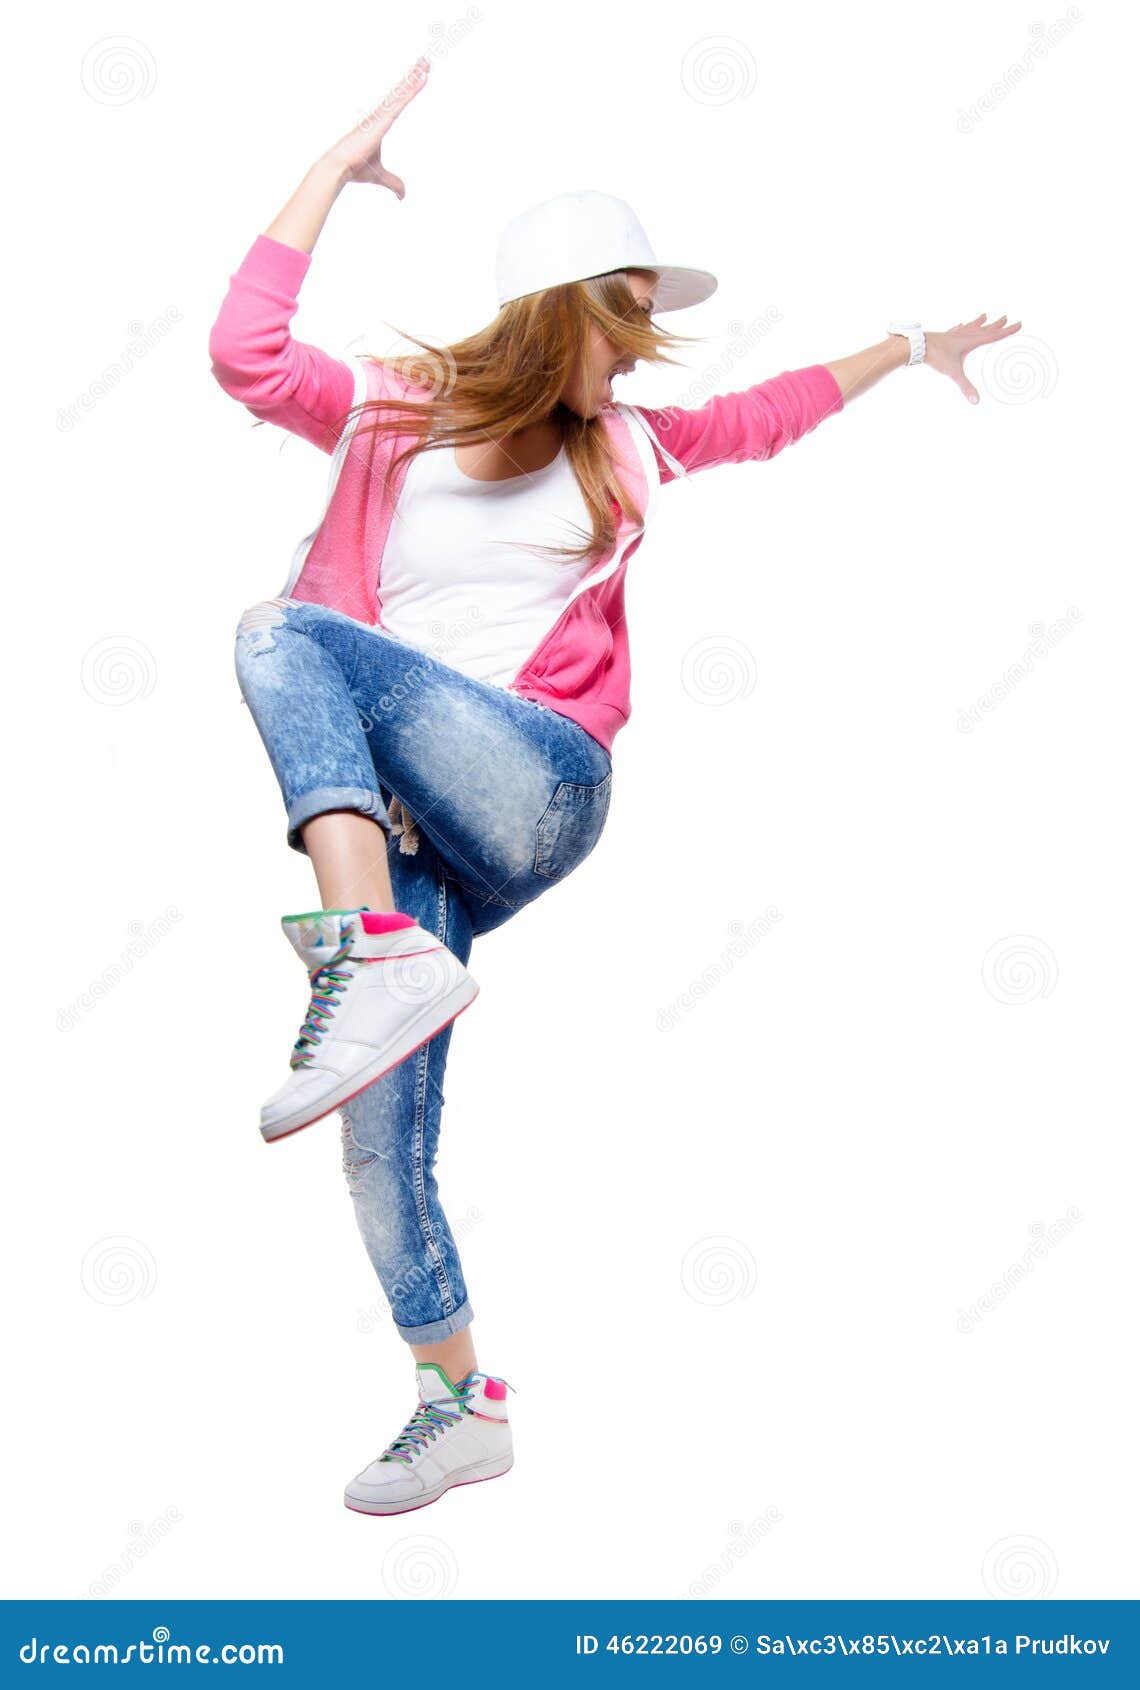 Young Hip Hop Dancer Dancing Isolated on White Background. Stock Image -  Image of happy, hands: 46222069